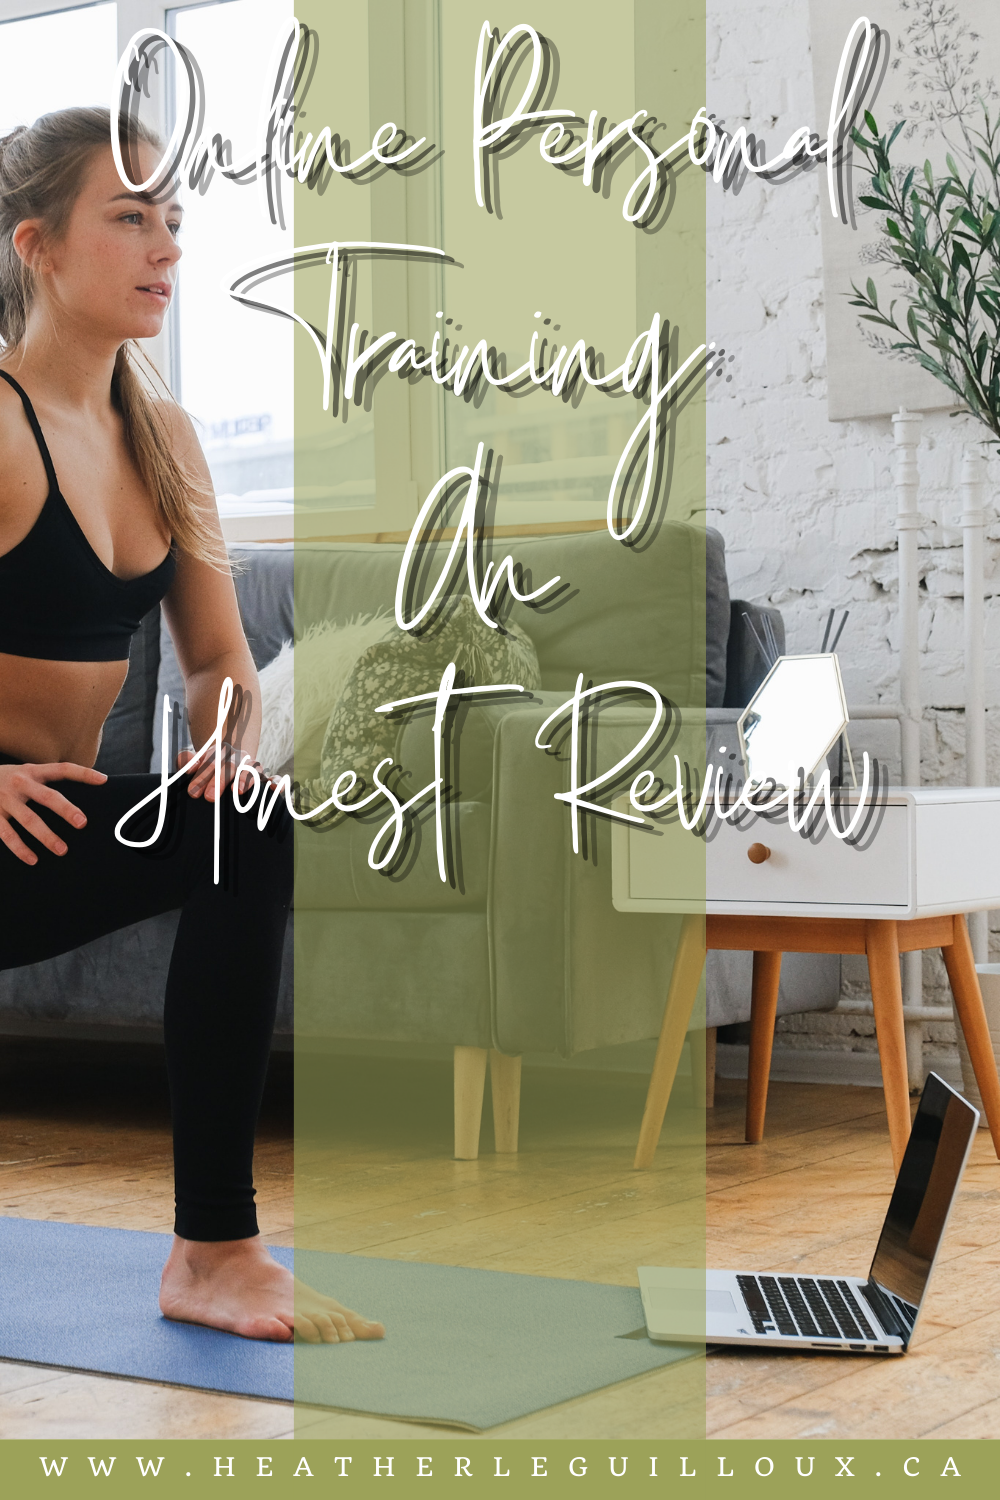 When I had the opportunity to try out virtual personal training in the comfort of my own home, it felt like a chance to try something new to help me get out of my usual winter-time fitness rut. Come along with me as I share an honest review of my experience of trying out personal training sessions at home. #virtual #personaltraining #fitness #resolution #newyears